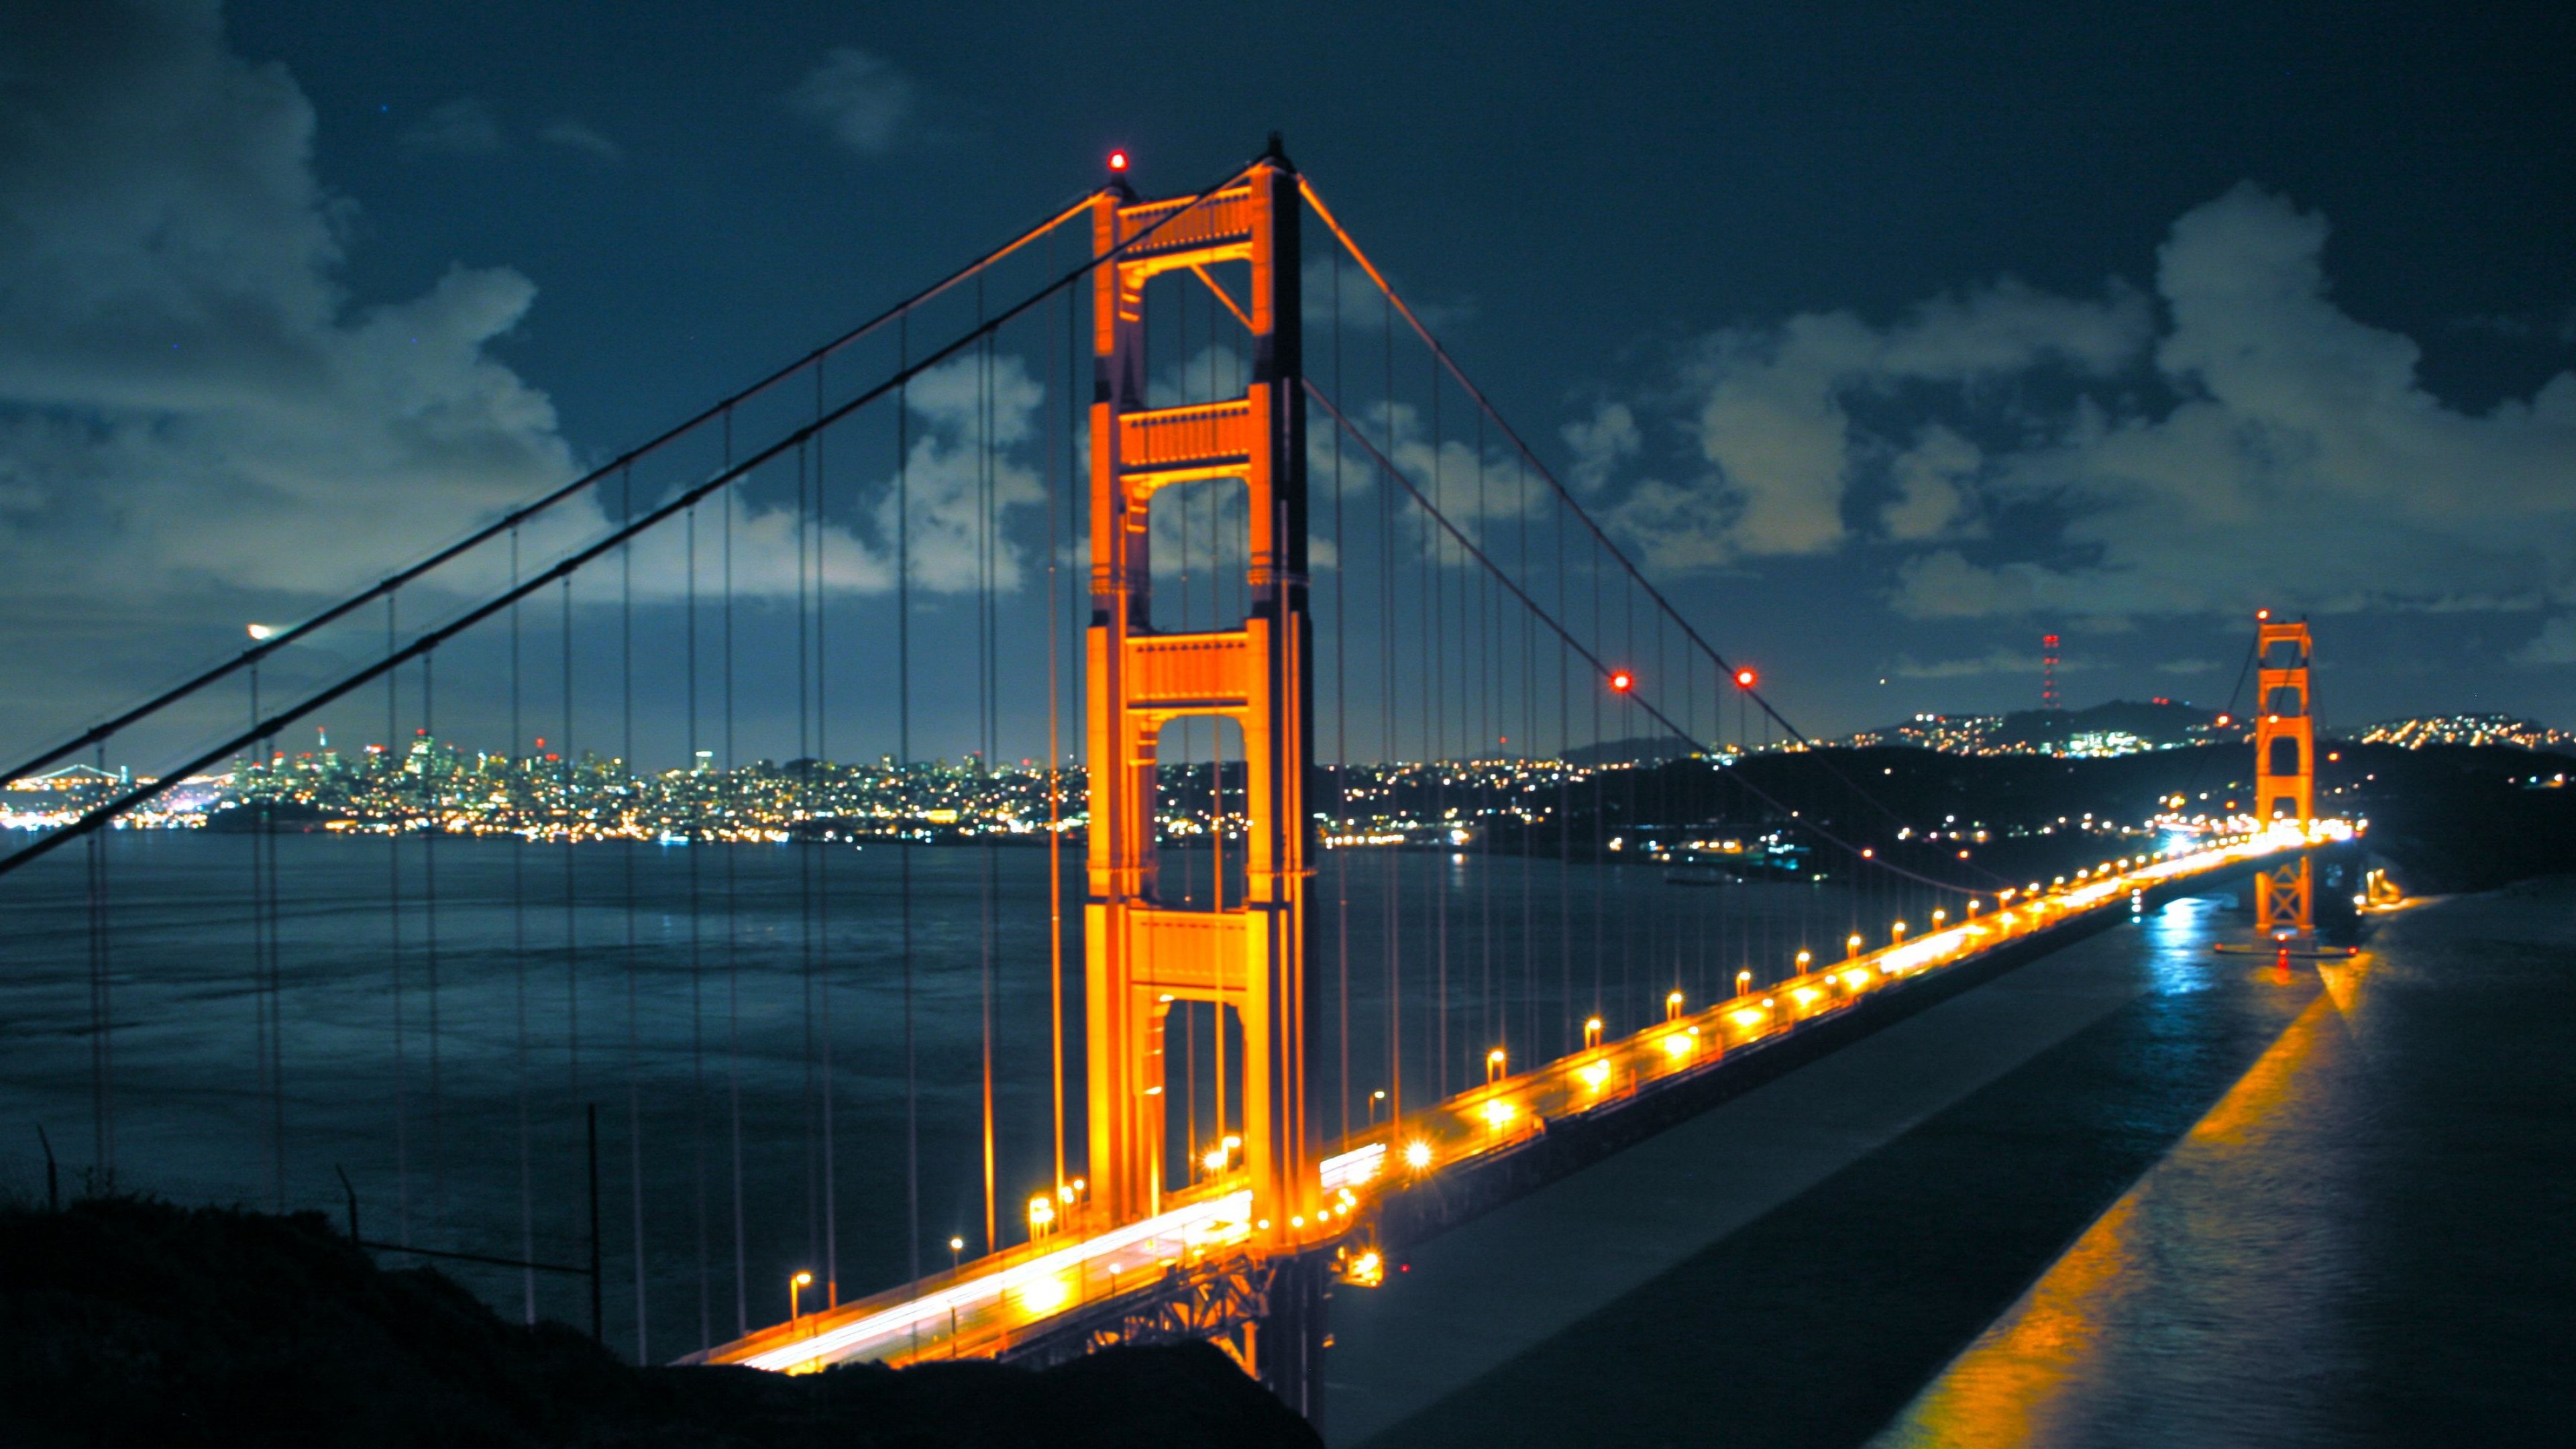 San Francisco: One of the top tourist destinations in the United States. 3840x2160 4K Wallpaper.